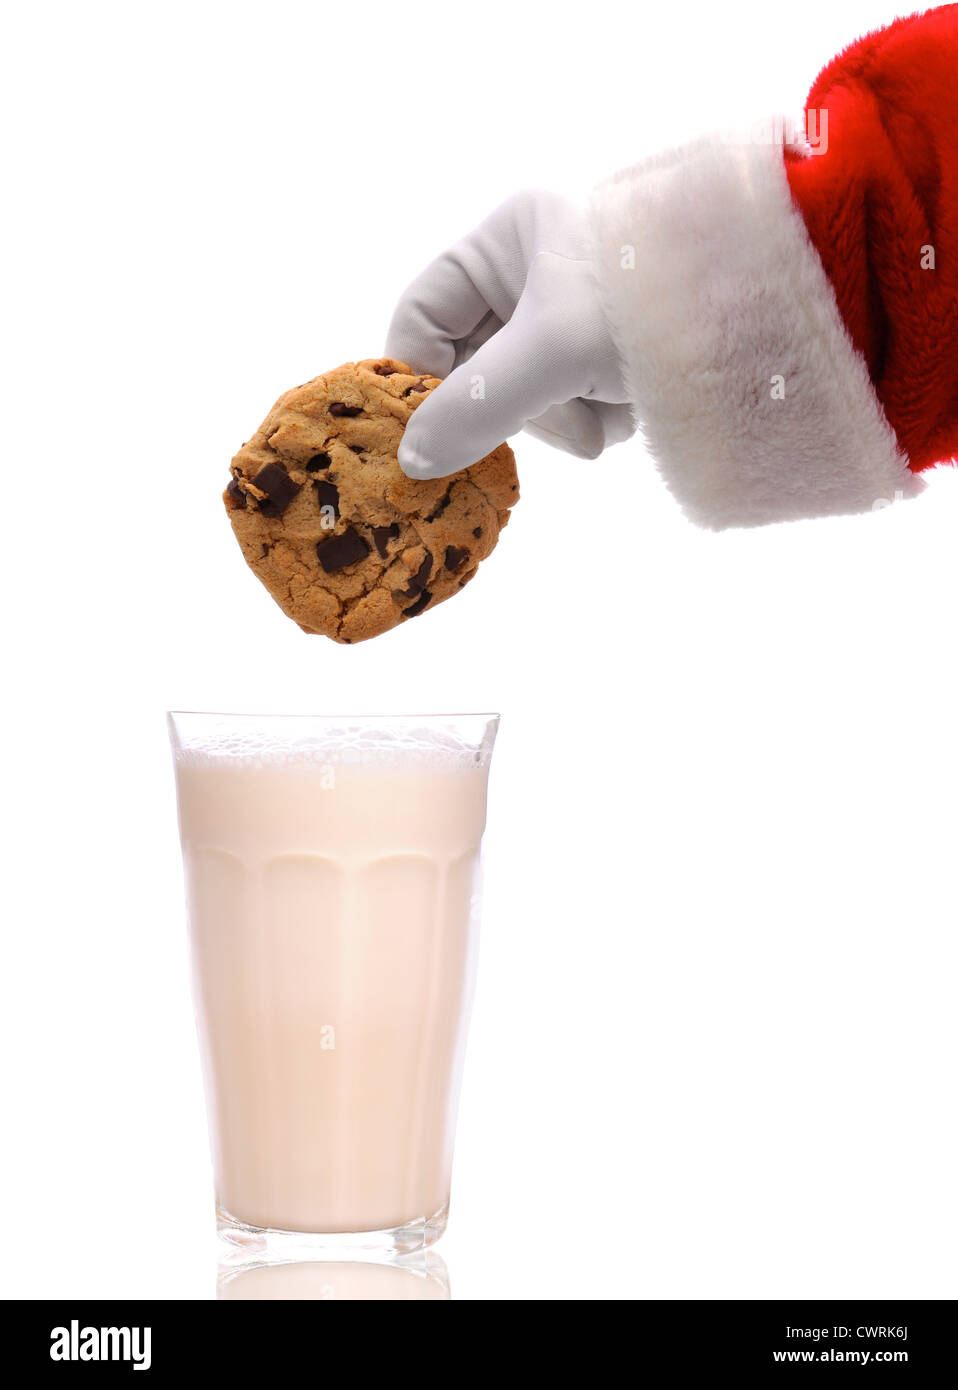 Santa Claus about to dunk a chocolate chip cookie into a glass of milk over a white background Stock Photo